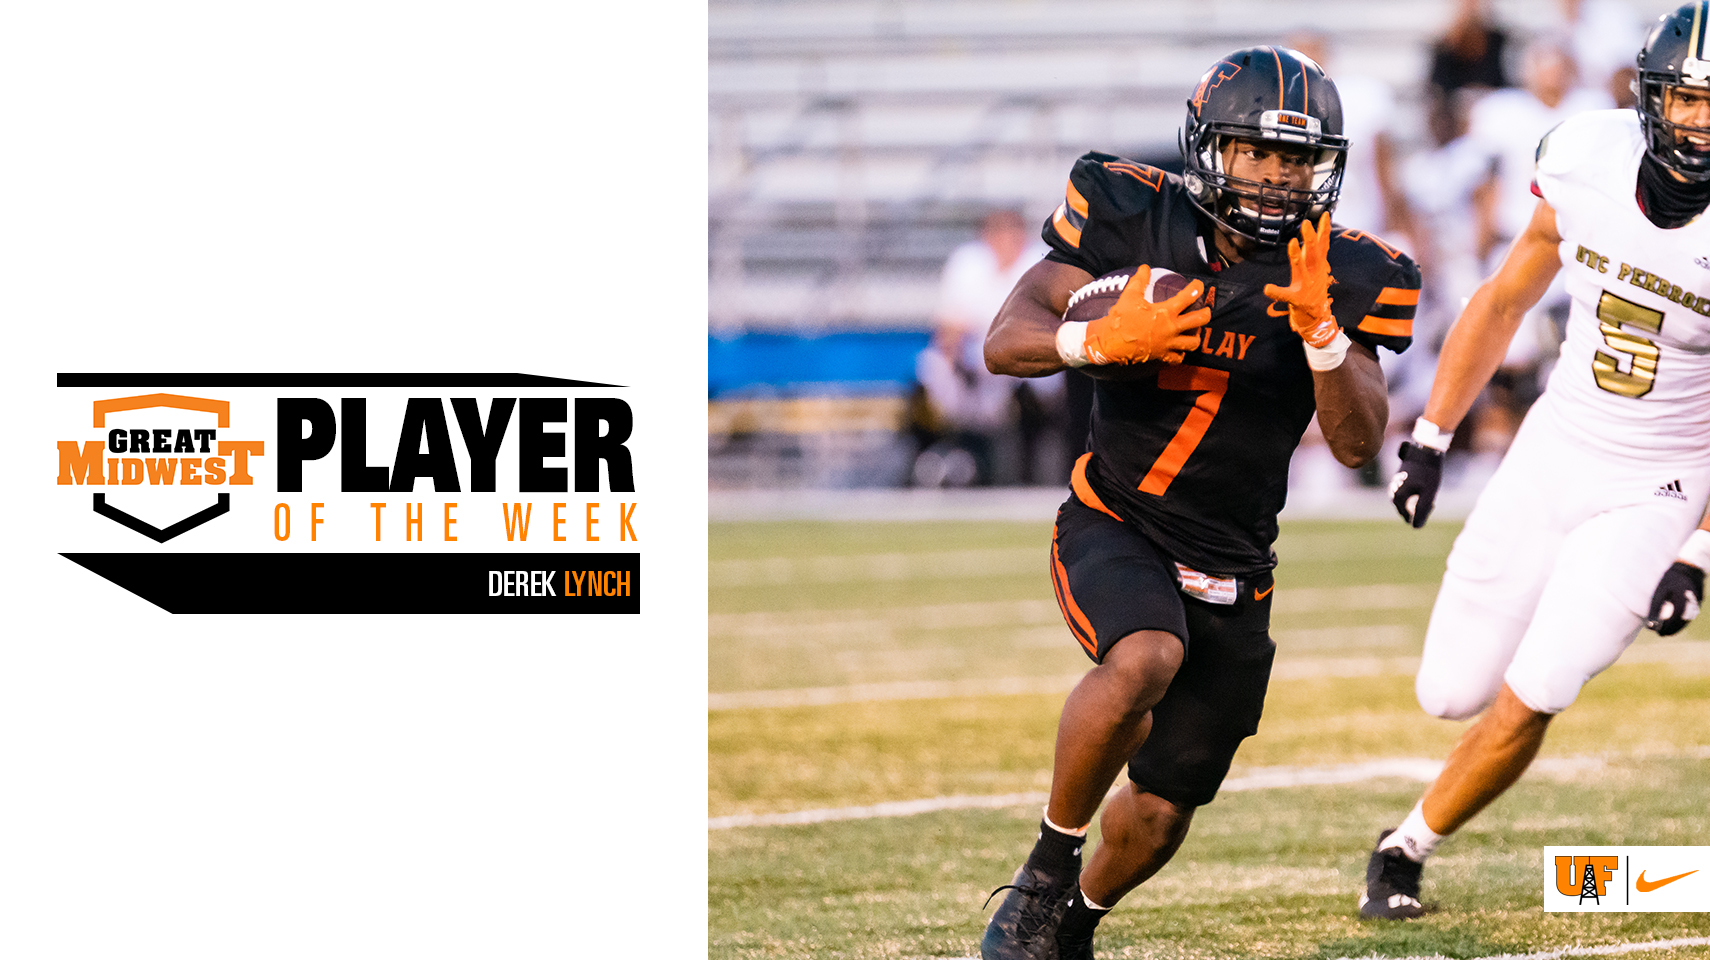 Derek Lynch Earns G-MAC Offensive Player of the Week Following Jawdropping Performance